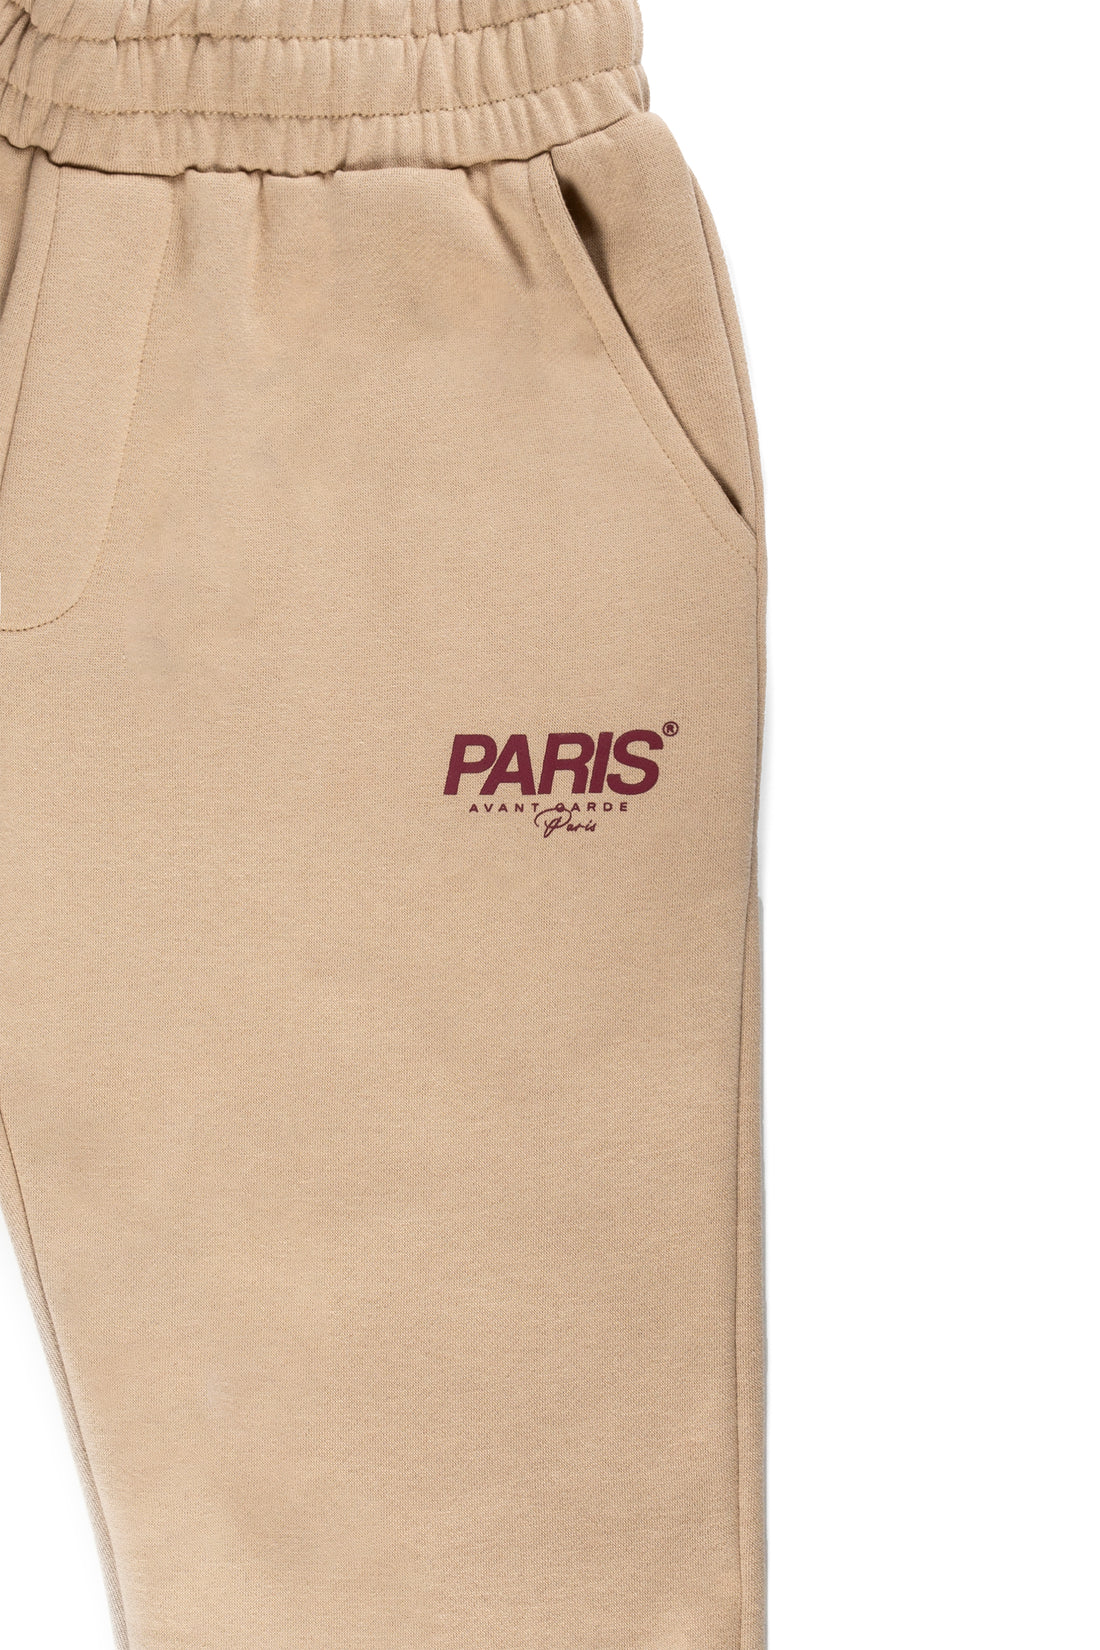 Parisien Jogger in Taupe